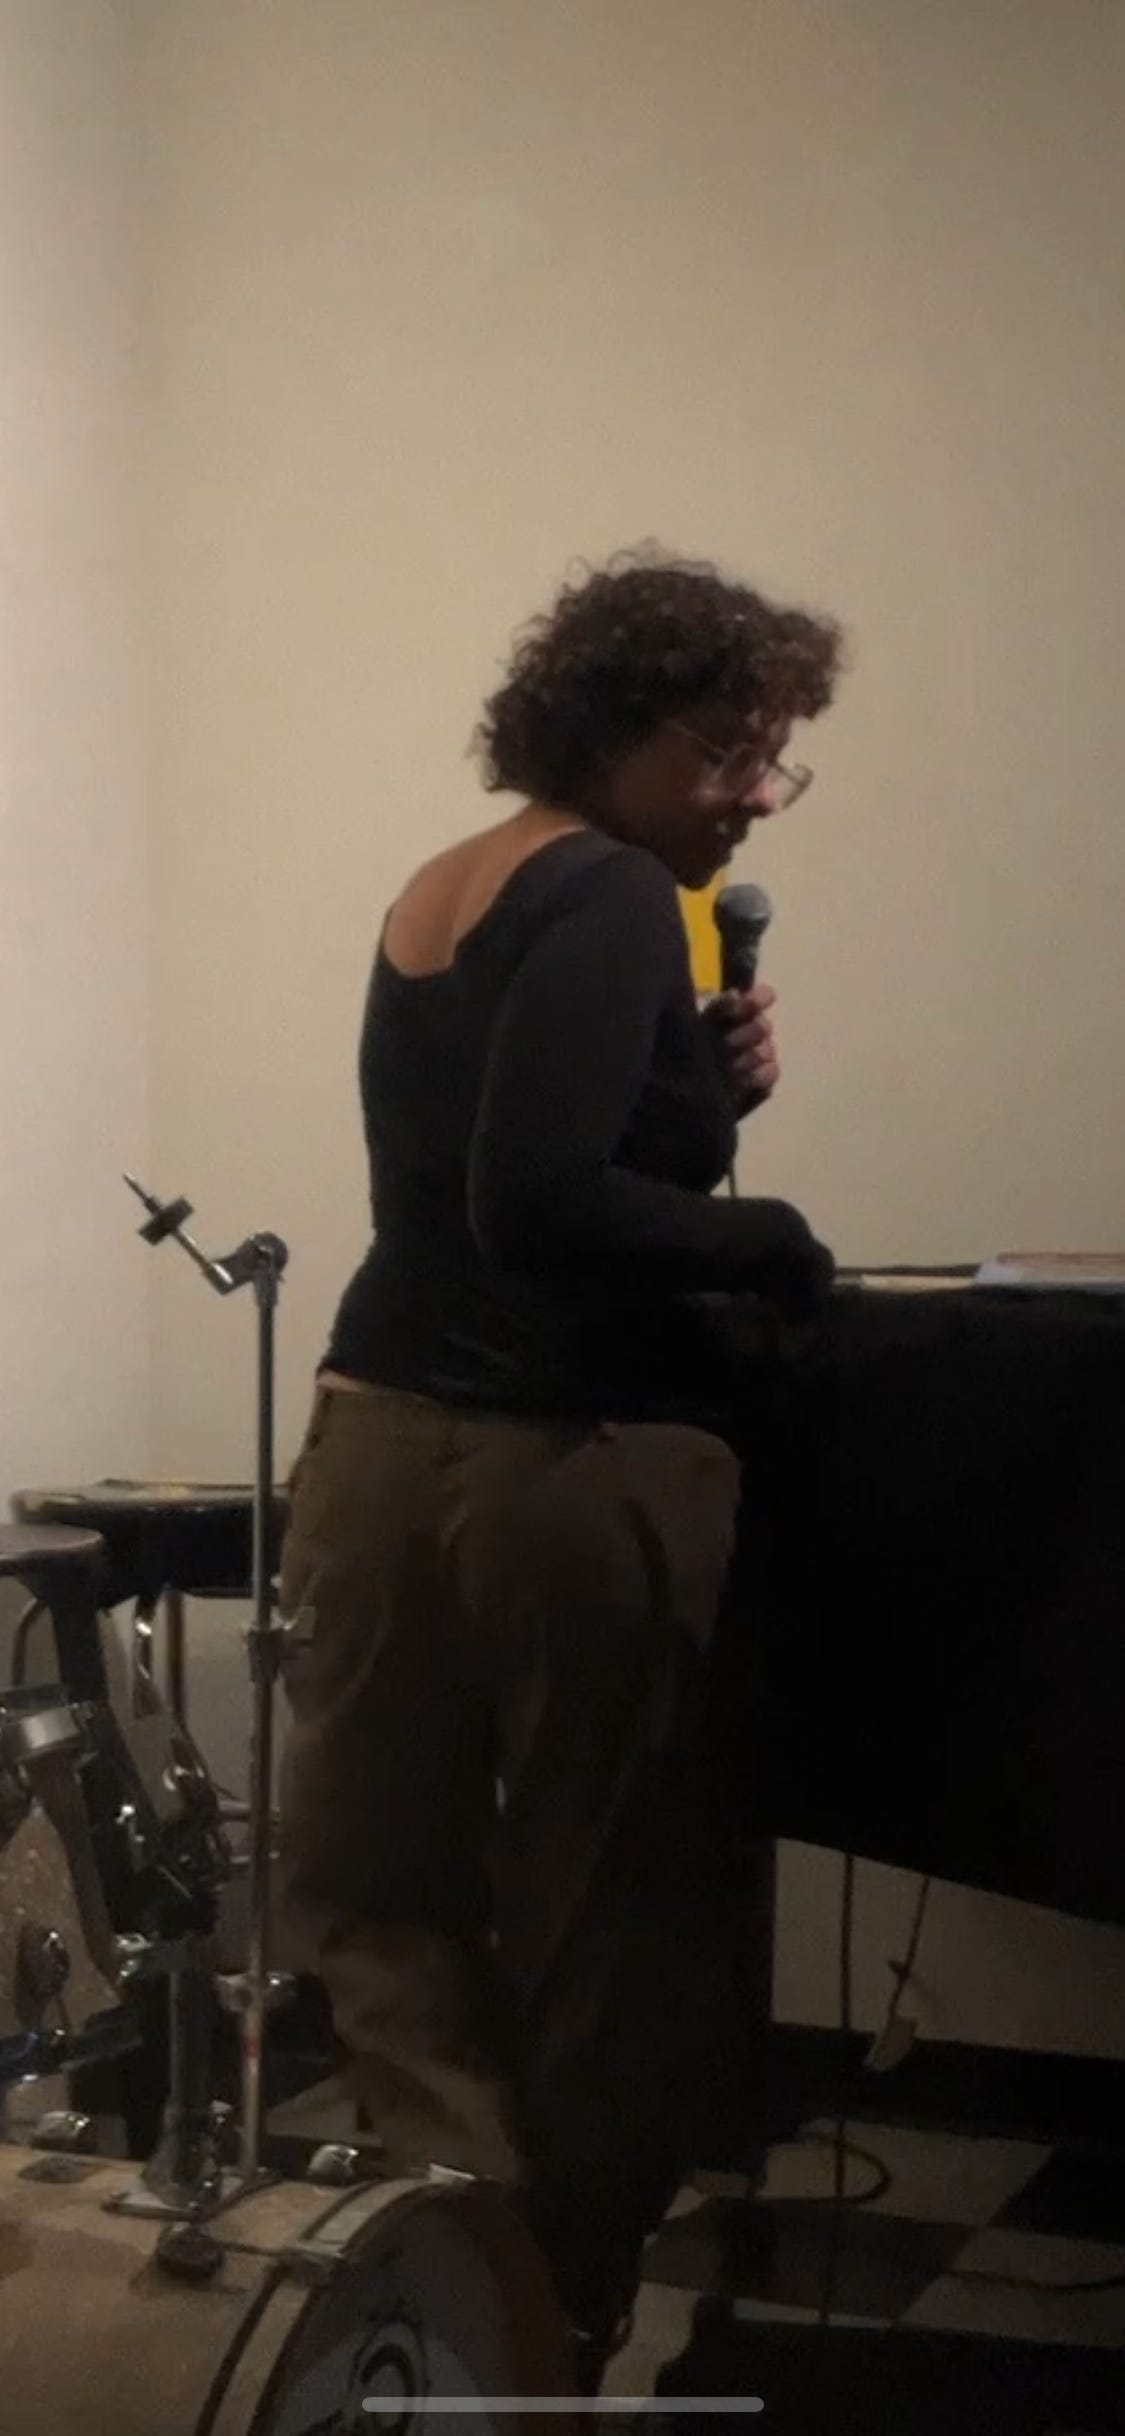 its me! im standing next to a grand piano with my back turned but im turning in a way where you can see i am talking into a microphone. i think i look quite stylish and smart lol